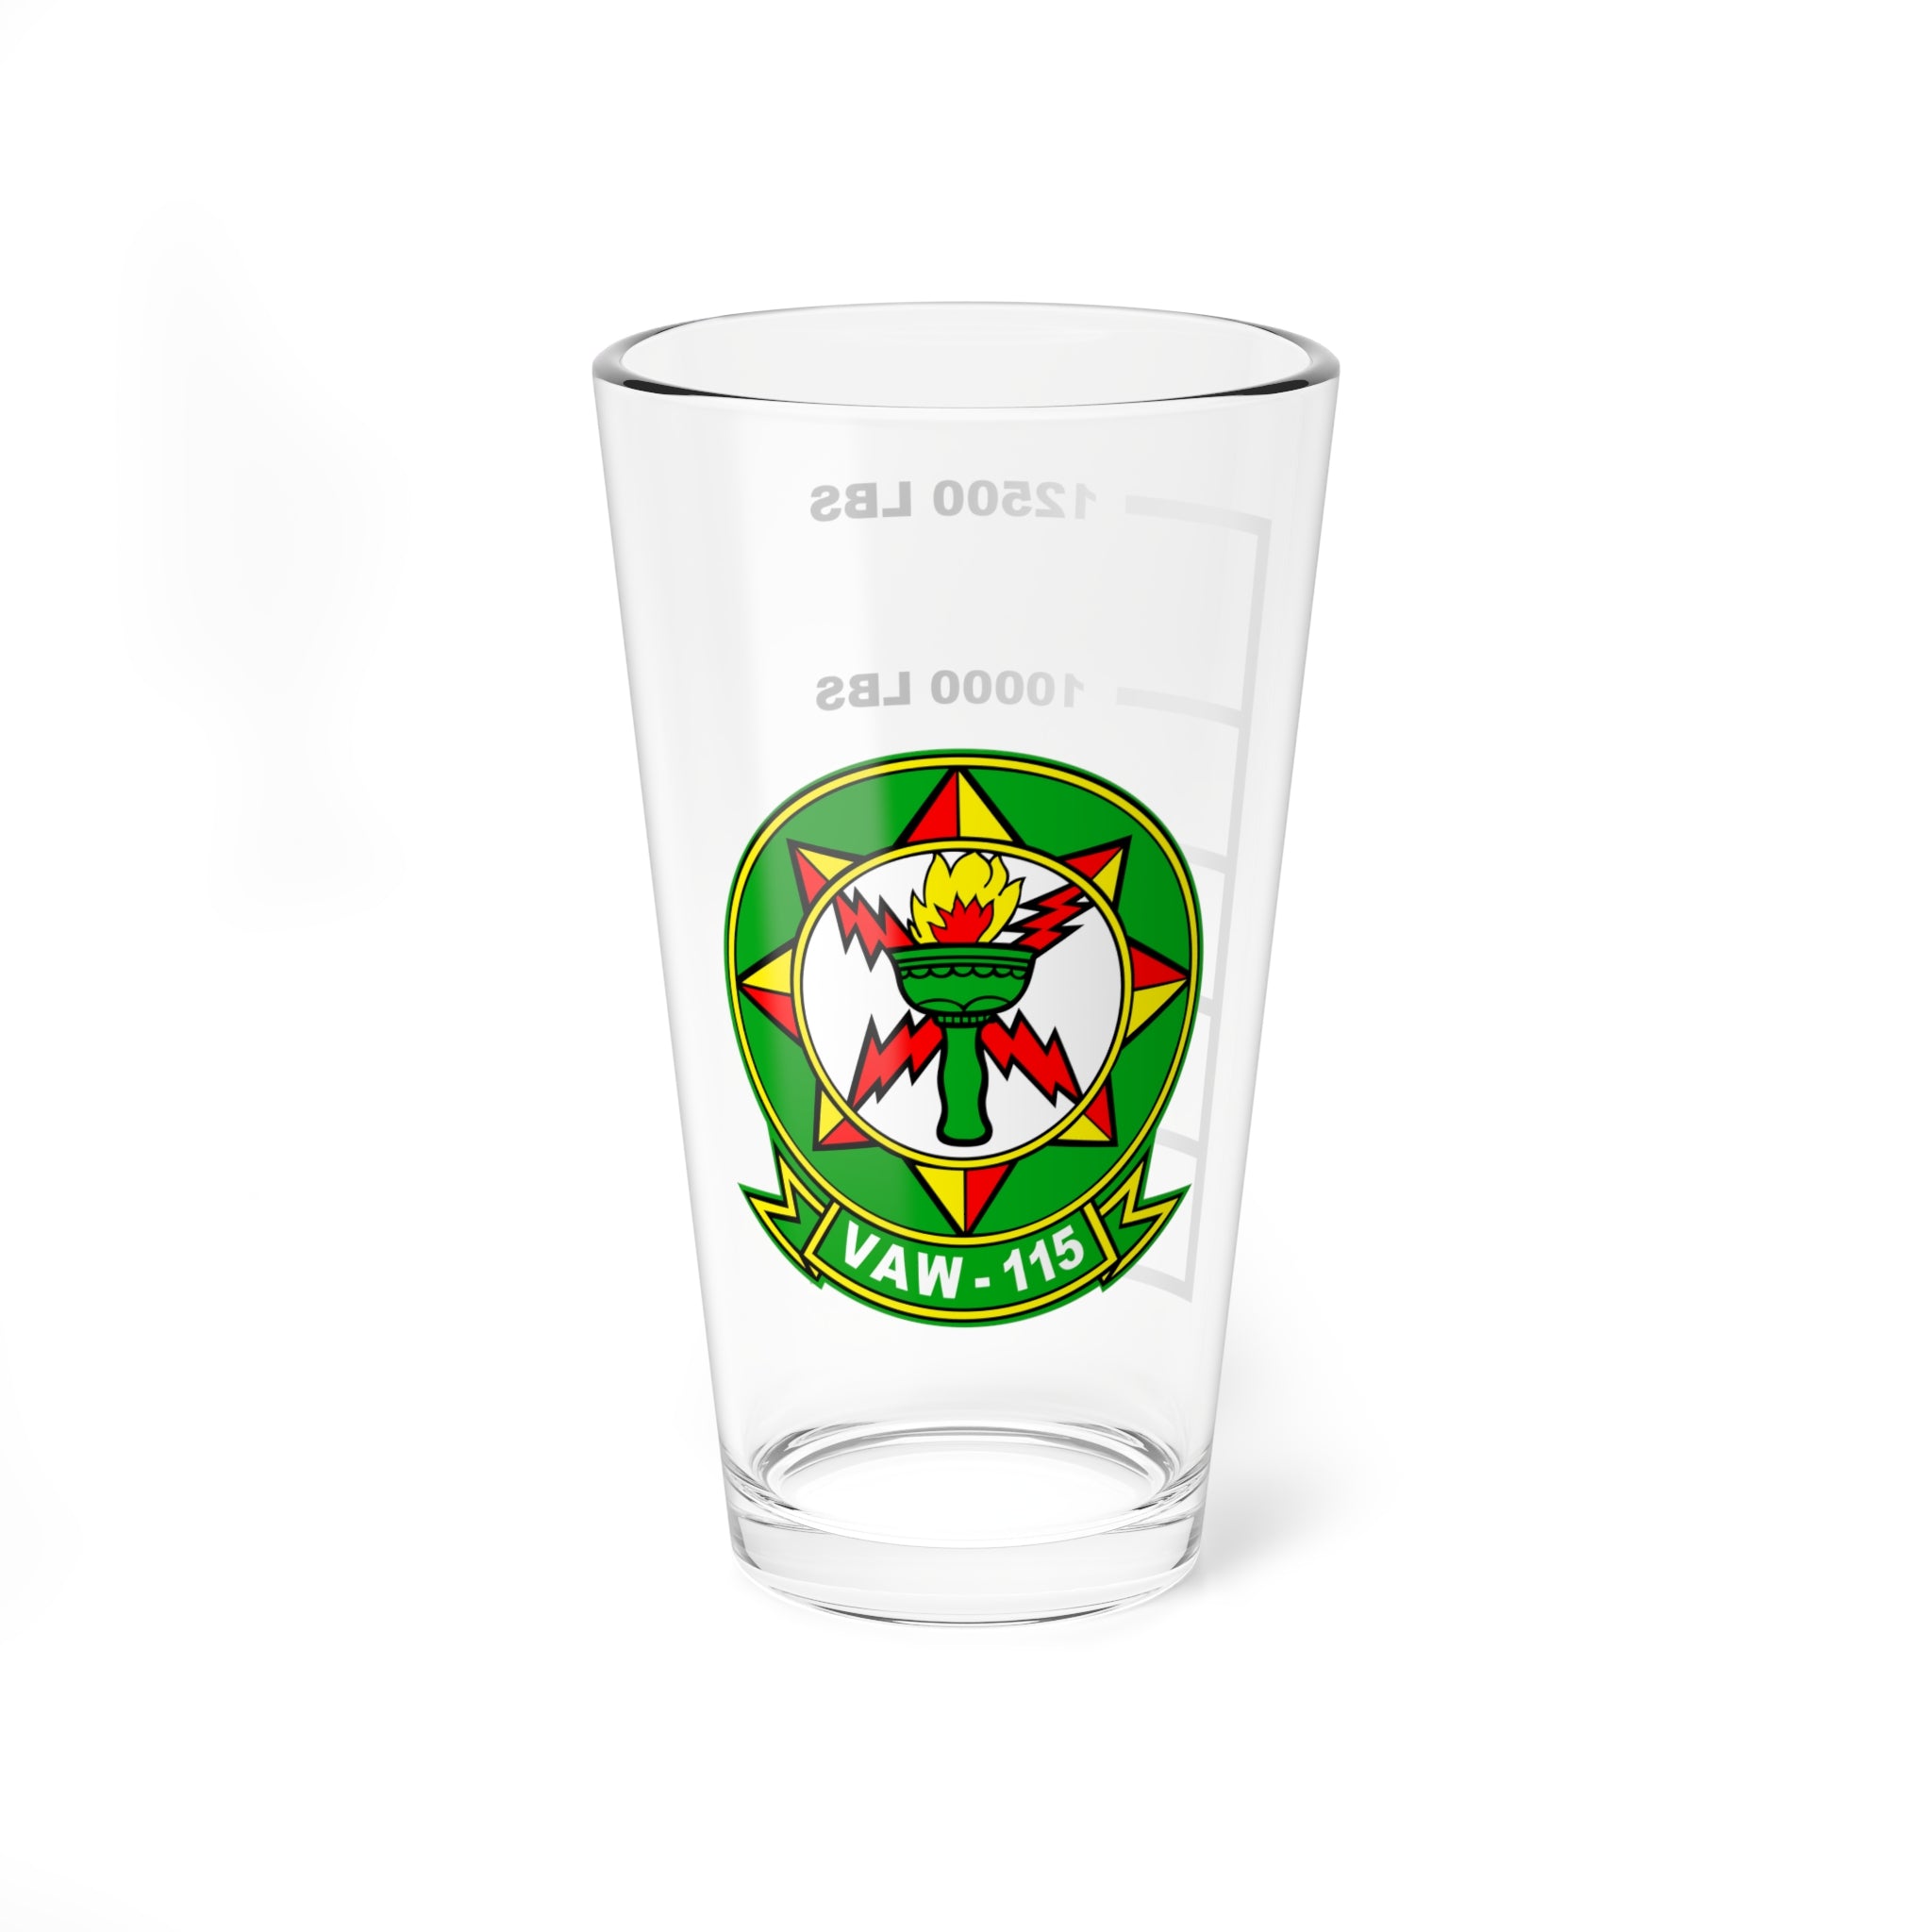 VAW-115 "Liberty Bells"  Fuel Low Pint Glass, 16oz, Navy Airborn Early Warning Squadron Flying the E-2 Hawkeye